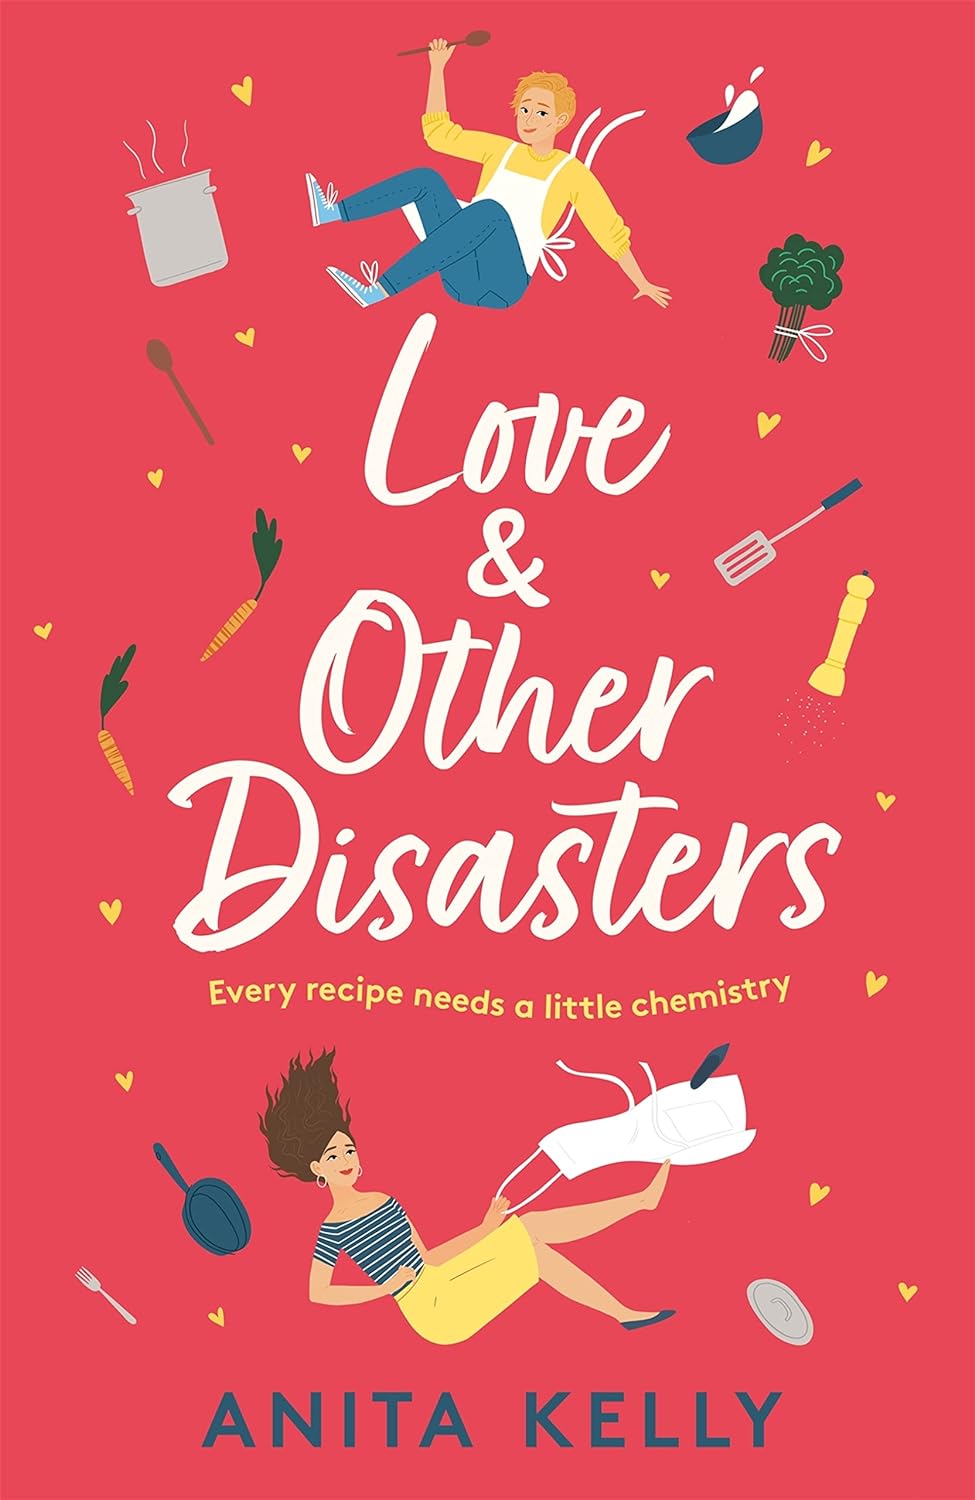 The red book cover for Love & Other Disasters has food, cooking pots, and utensils floating around with yellow love hearts. Two white people are also floating on the cover, both wearing aprons.